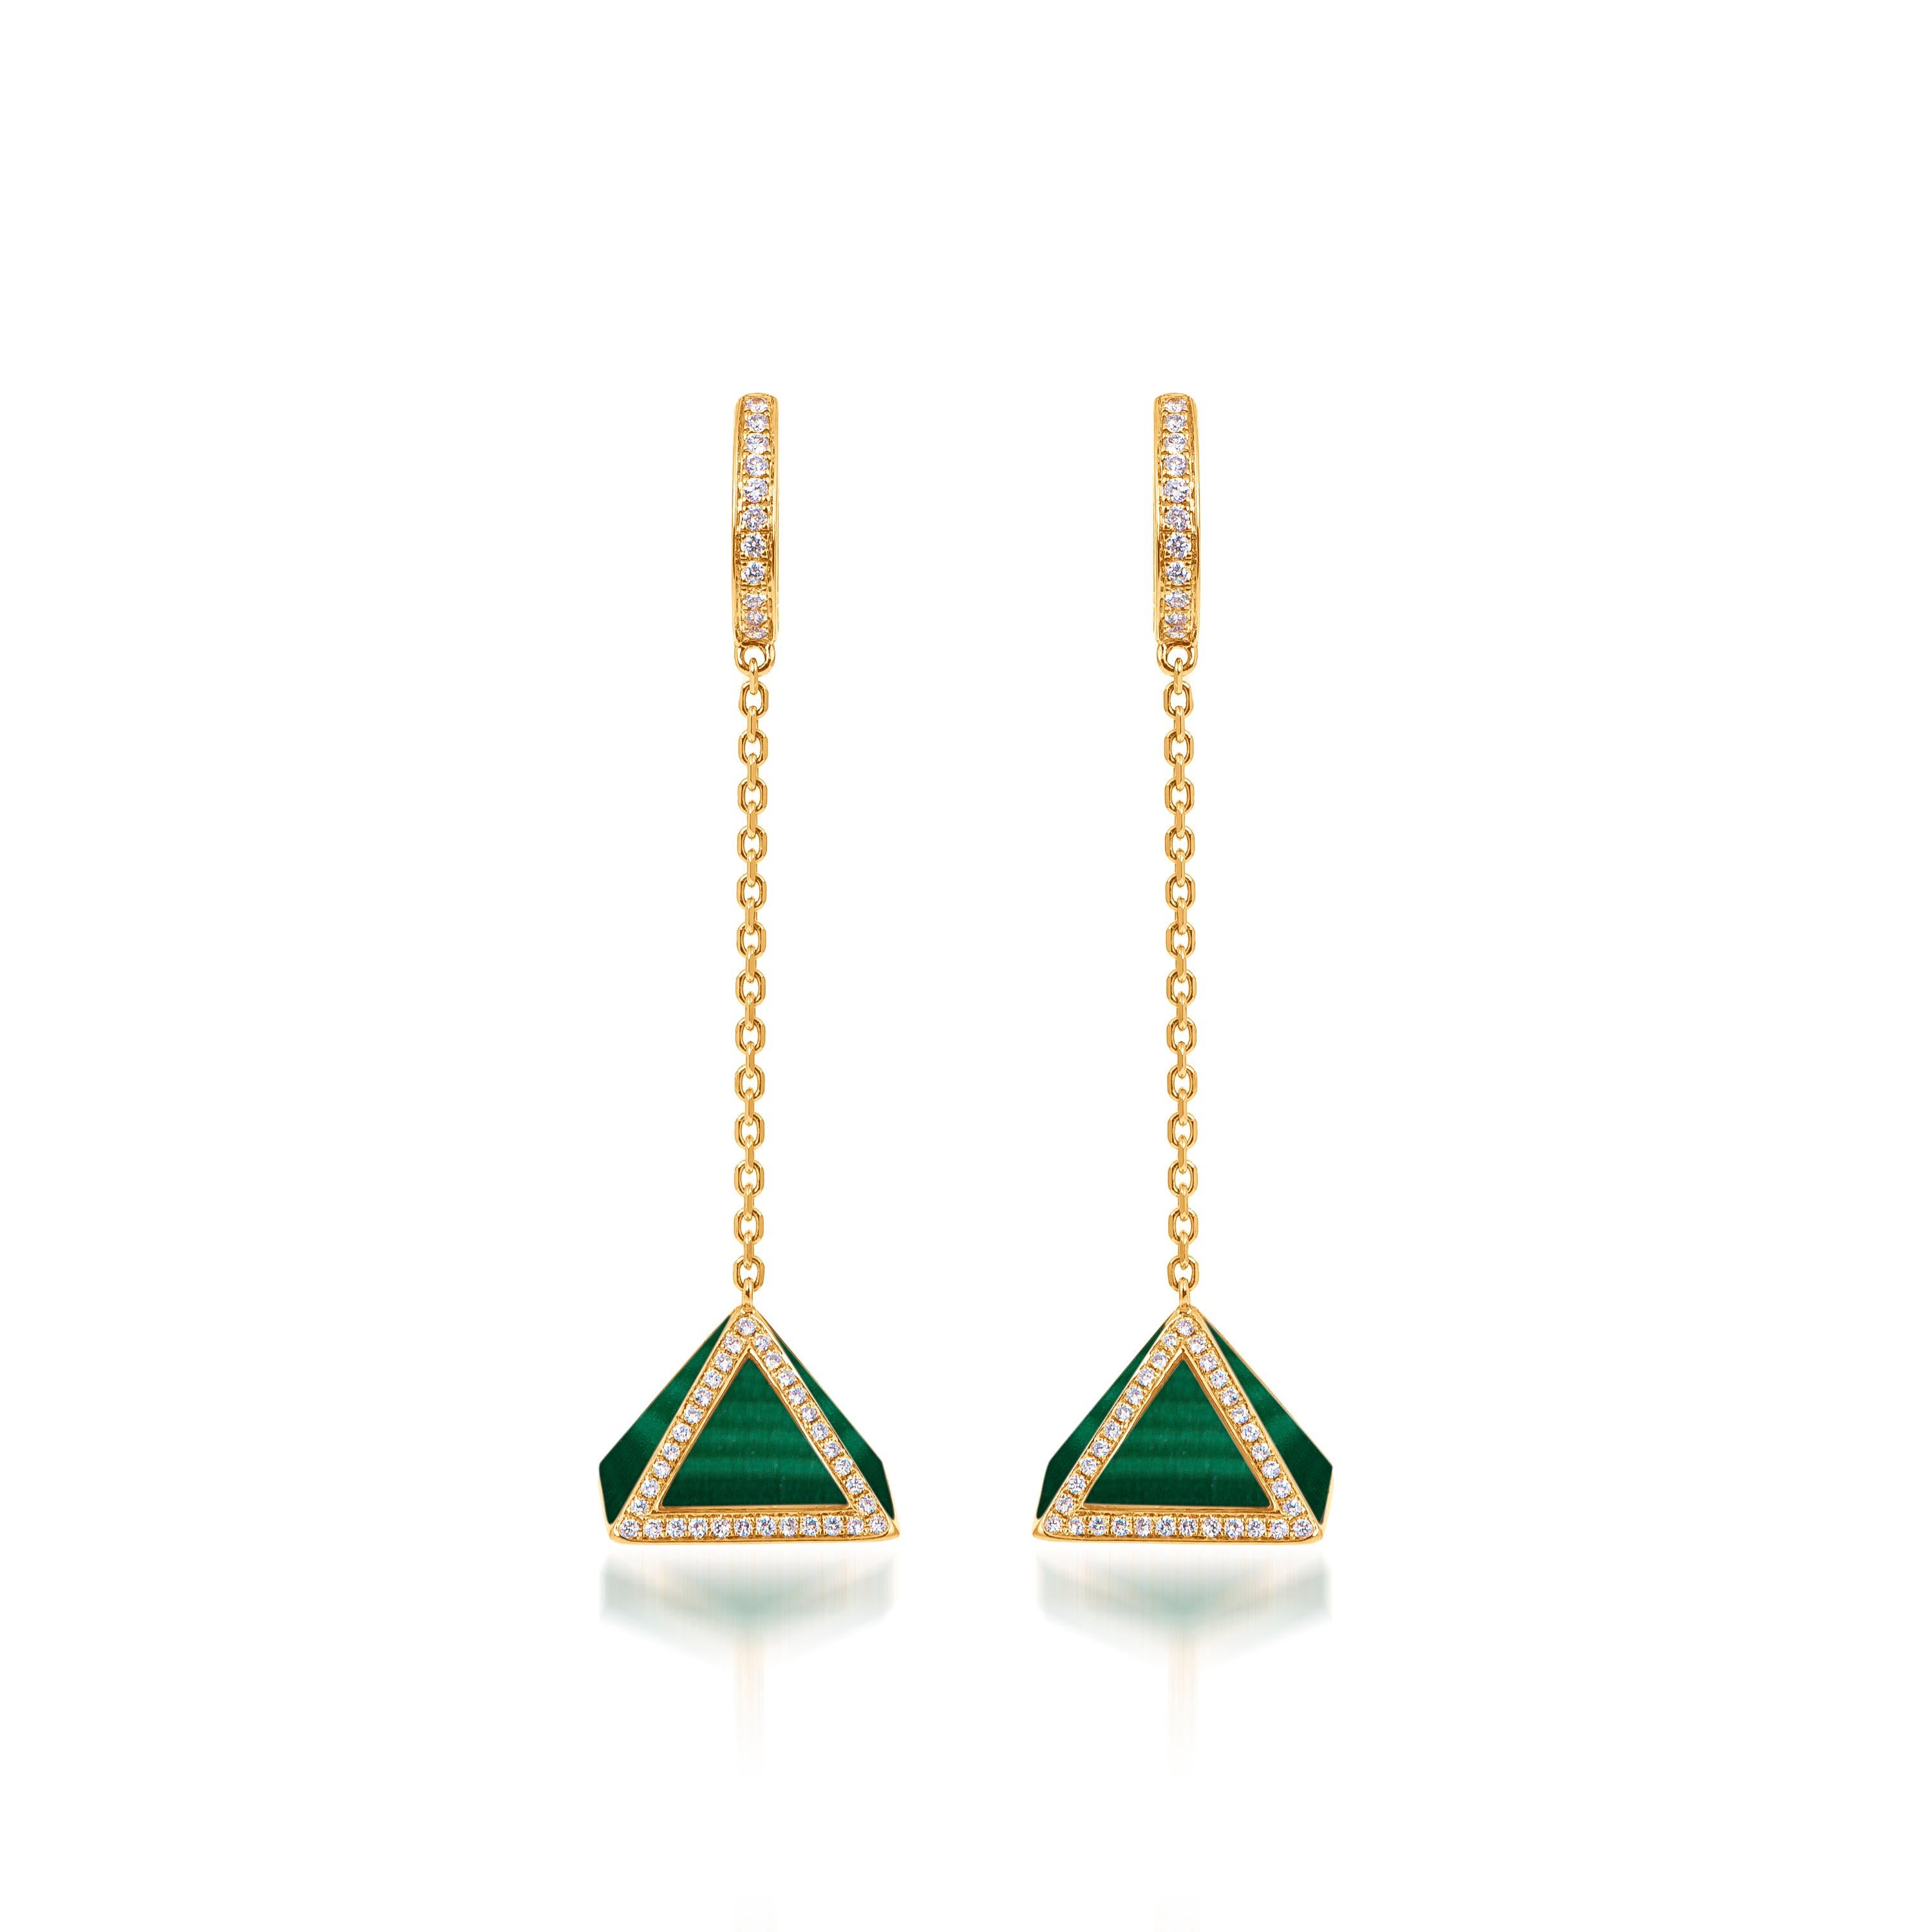 Through graphic, contemporary lines, Butani’s Tetra collection celebrates the beauty of symmetry while reimagining classic motifs of the past. 

Inspired by the strength and stability of pyramids, the Tetra Tribus Earrings drop gracefully below the